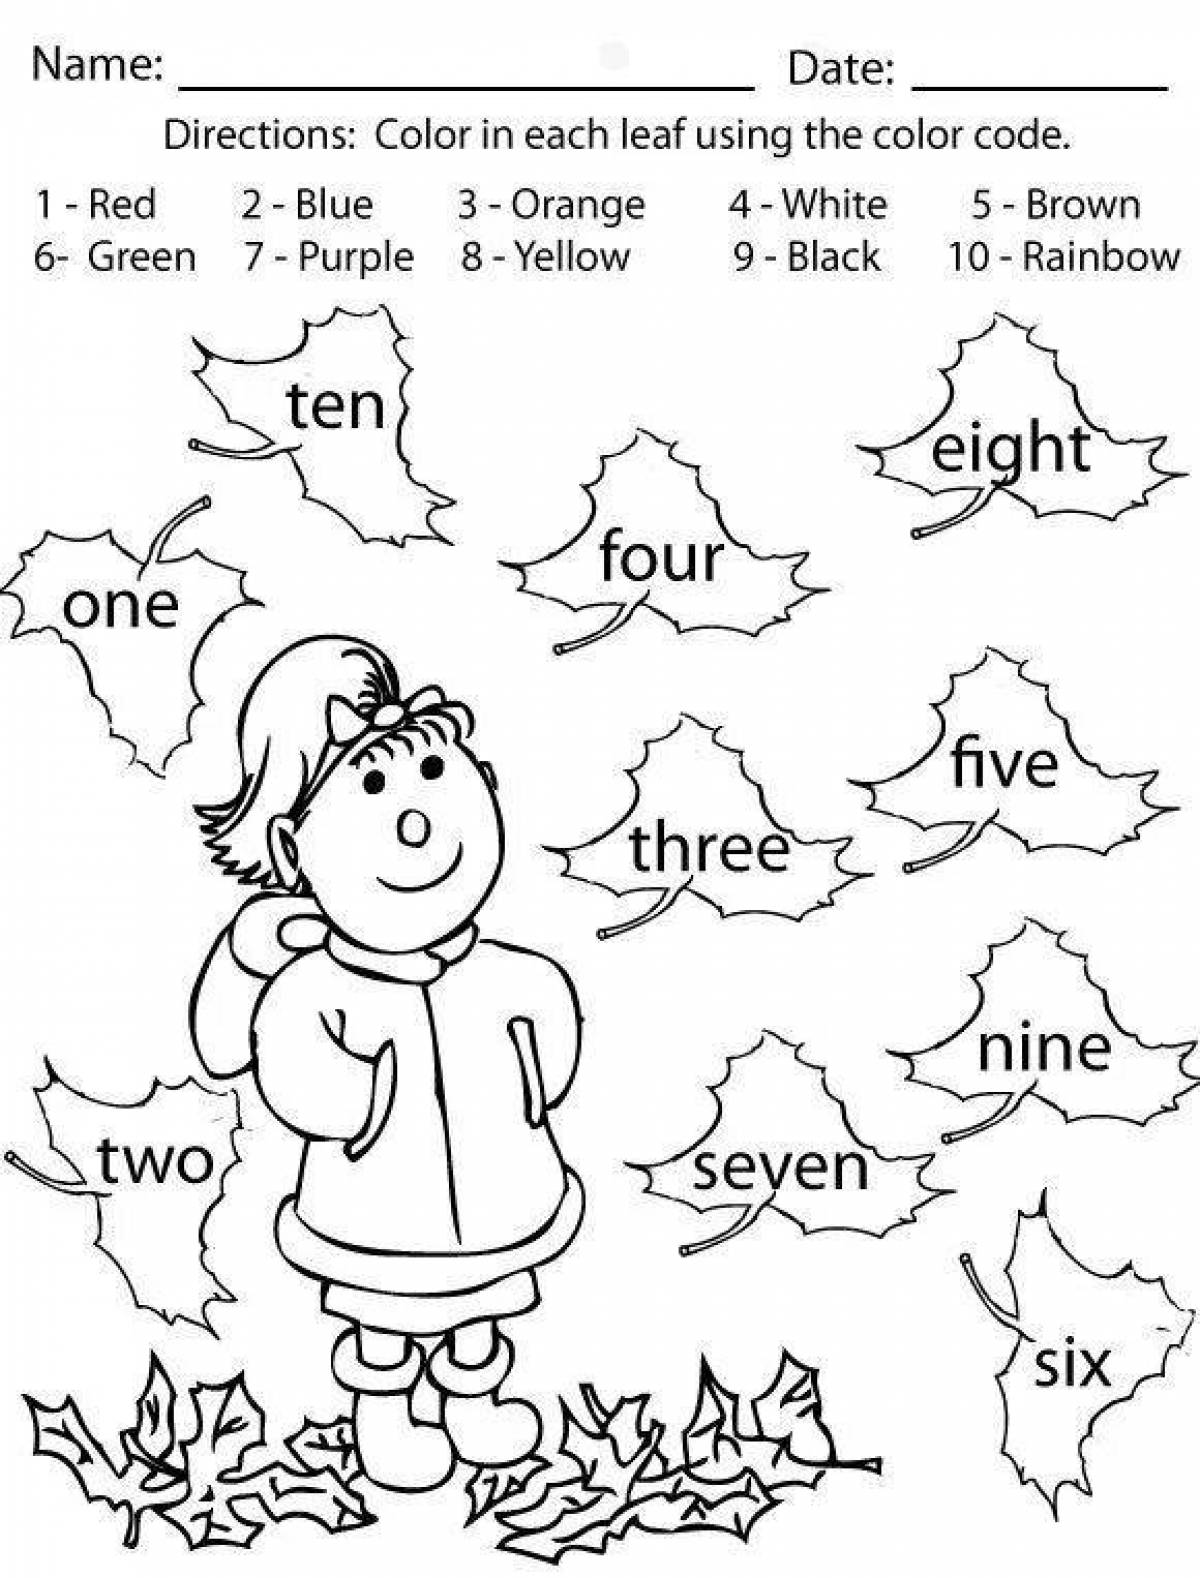 In English with assignments for children #8